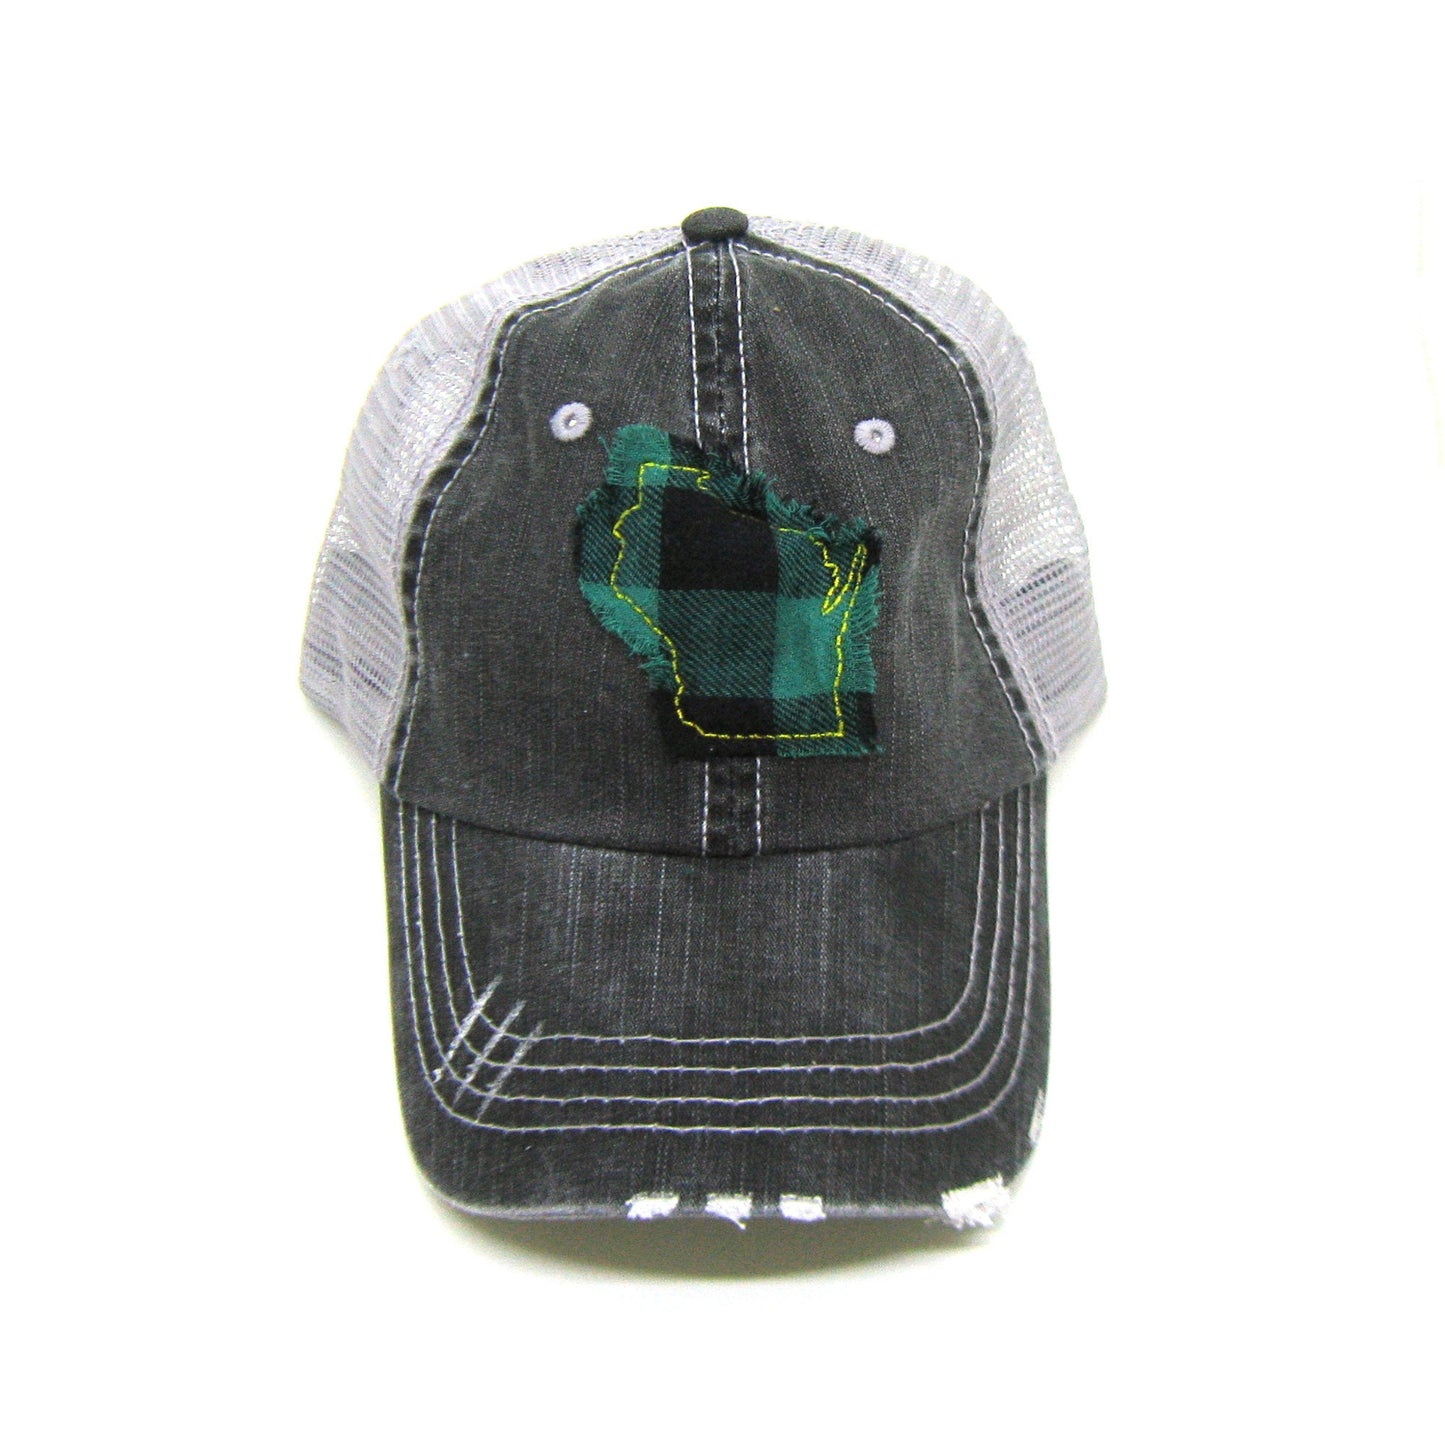 Gray Distressed Trucker Hat | Green Buffalo Check | All US States